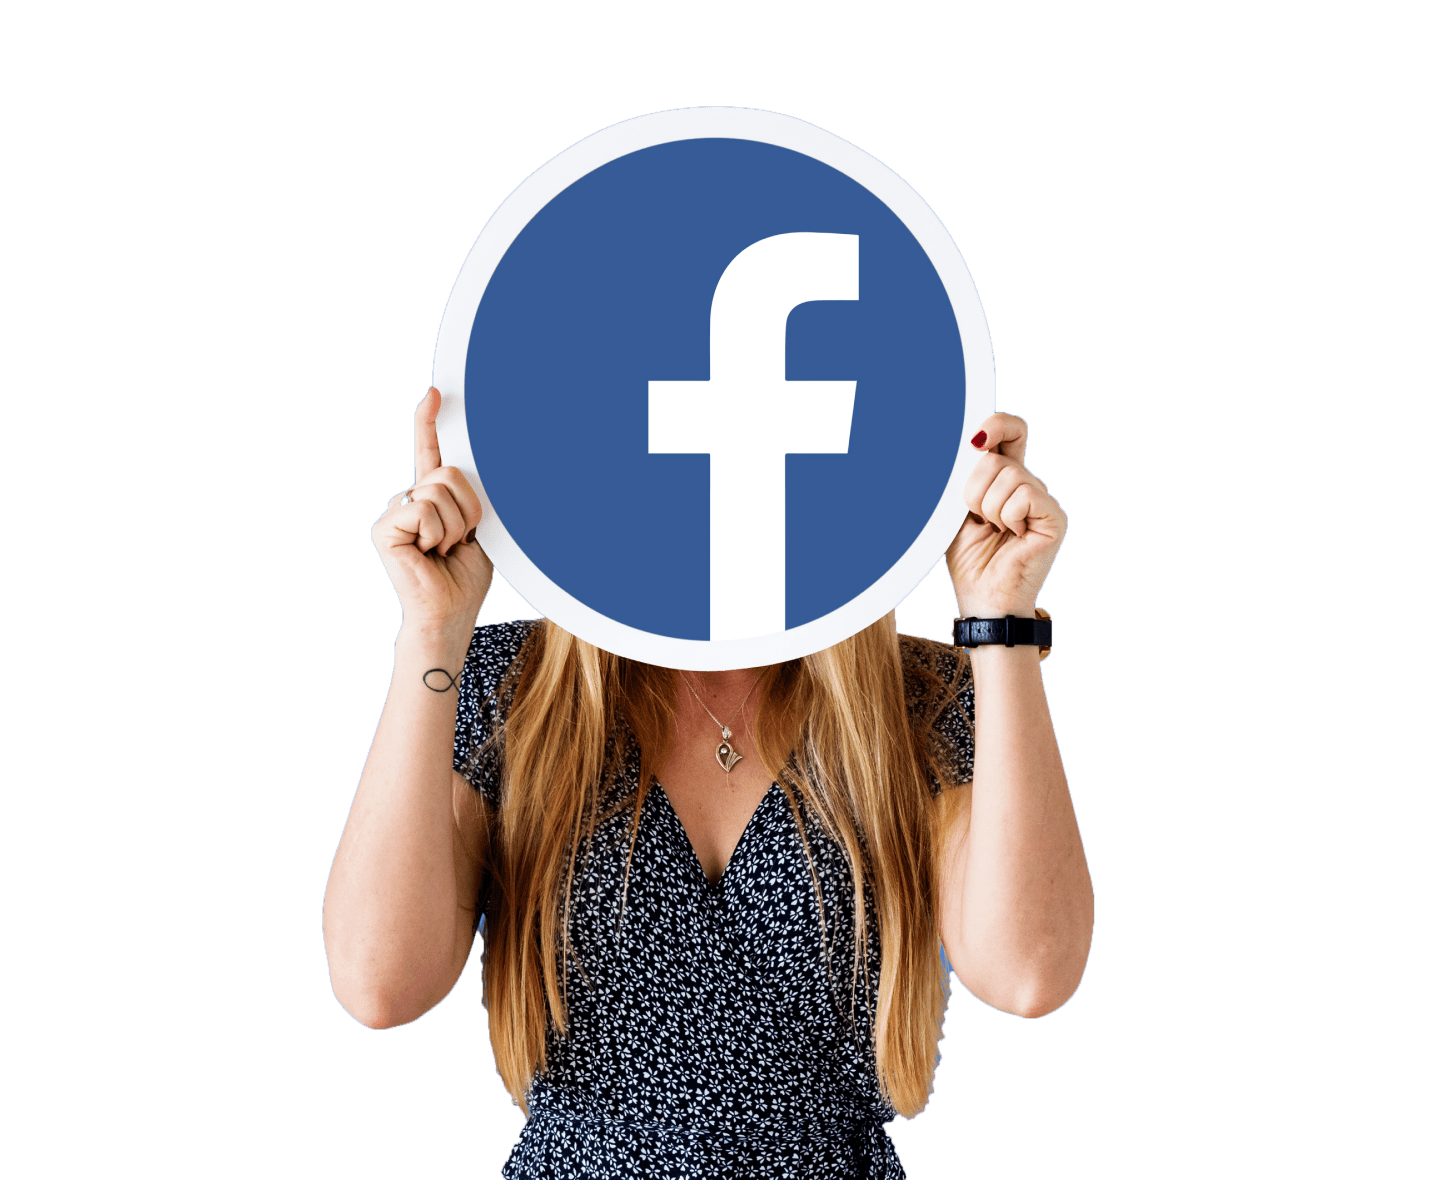 Woman holding the Facebook logo in front of her face